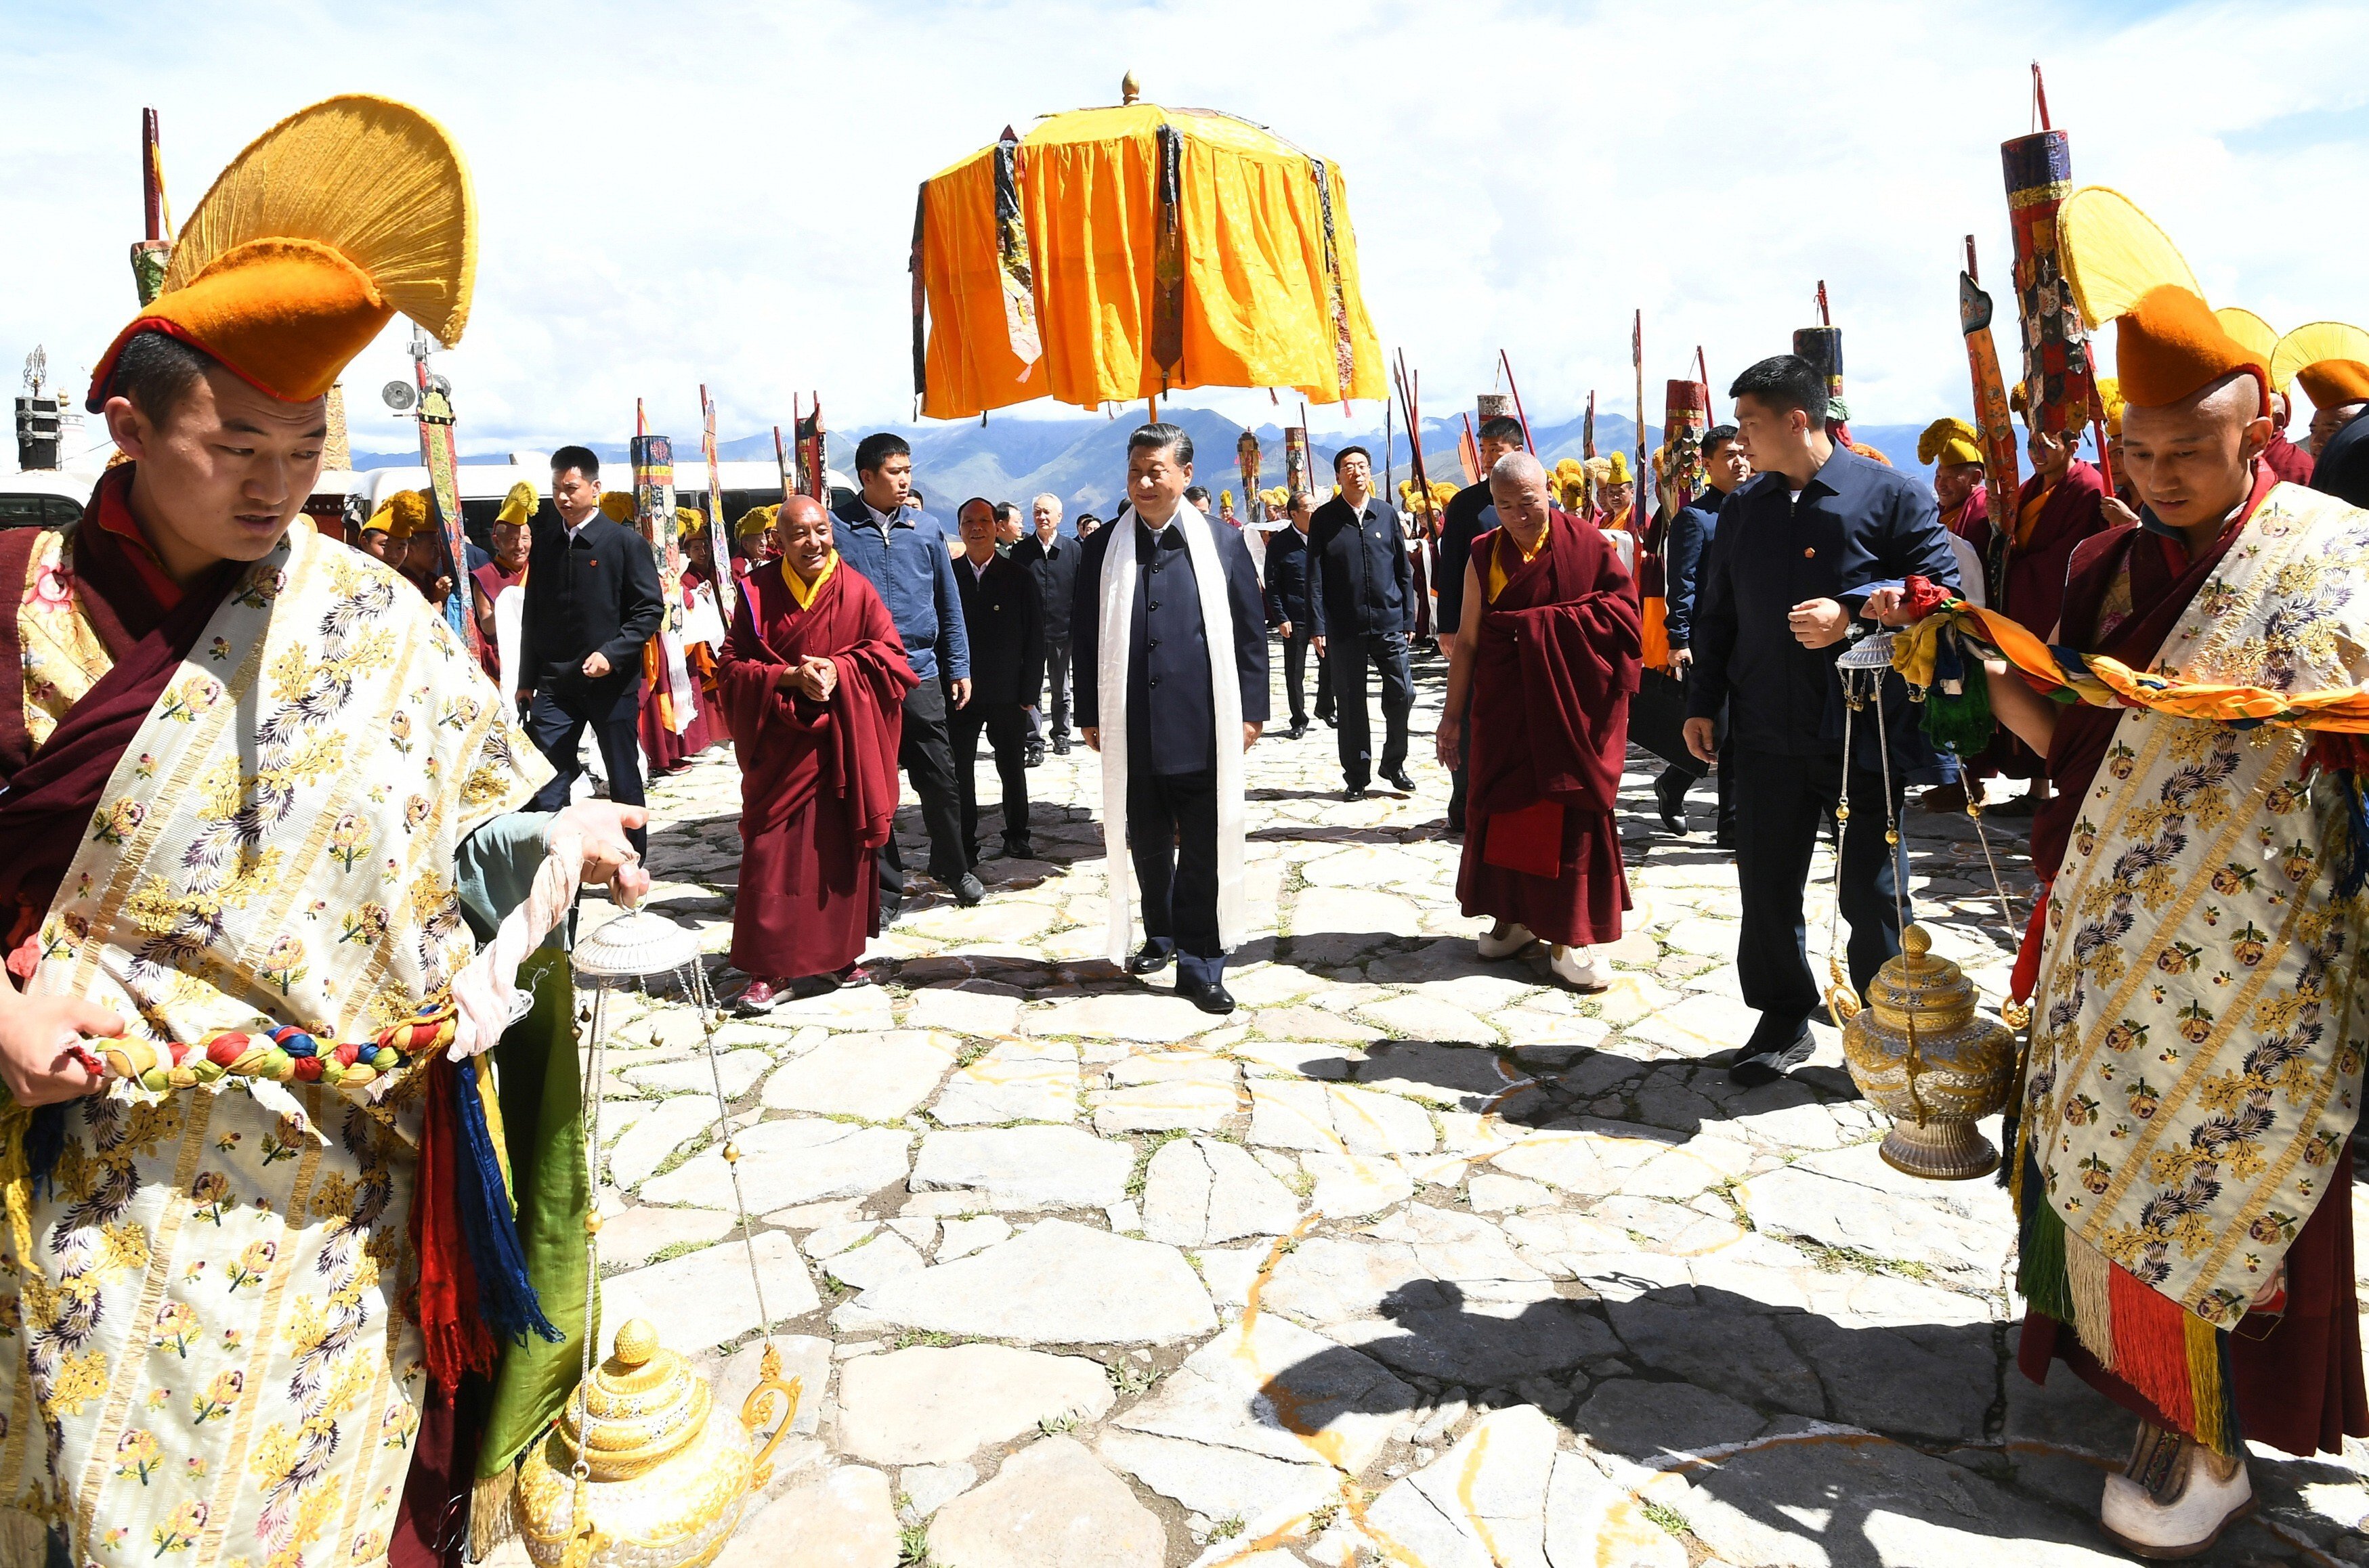 Xi Jinping, during his visit to the Drepung Monastery in Lhasa. Photo: Xinhua